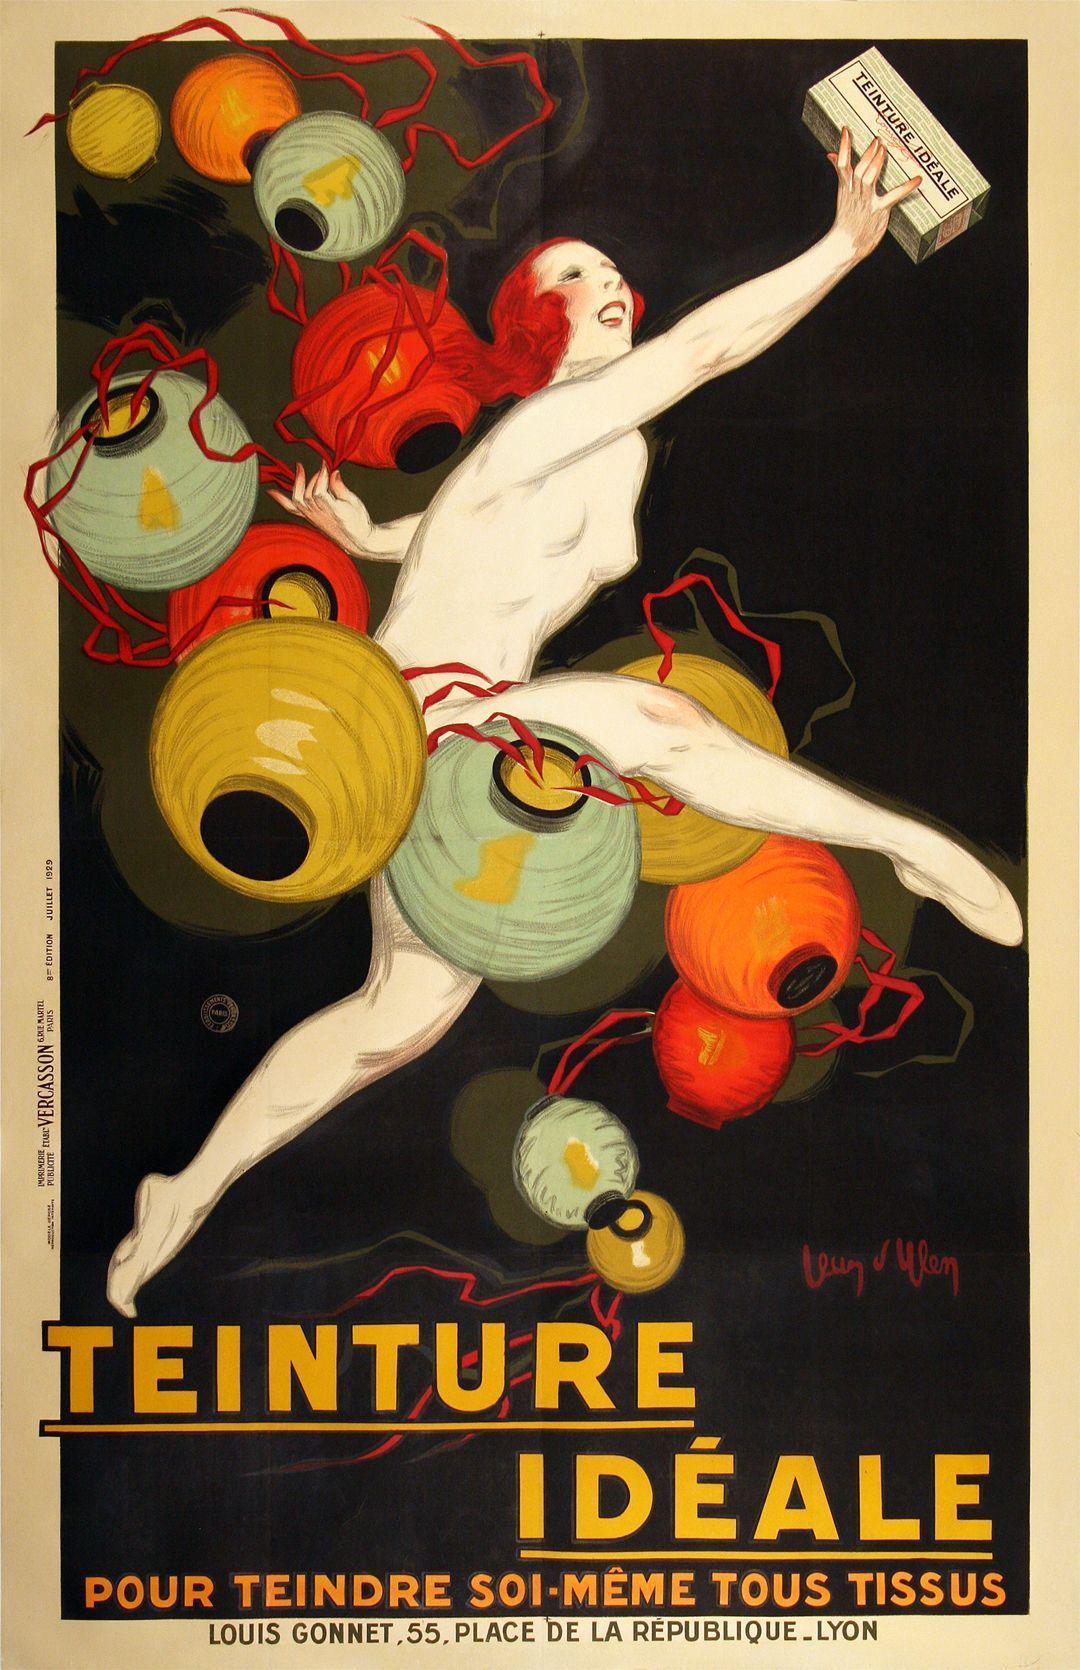 Teinture Ideale Poster 1929 by Jean Dylen Original Fabric Dye with Lanterns - Large Size